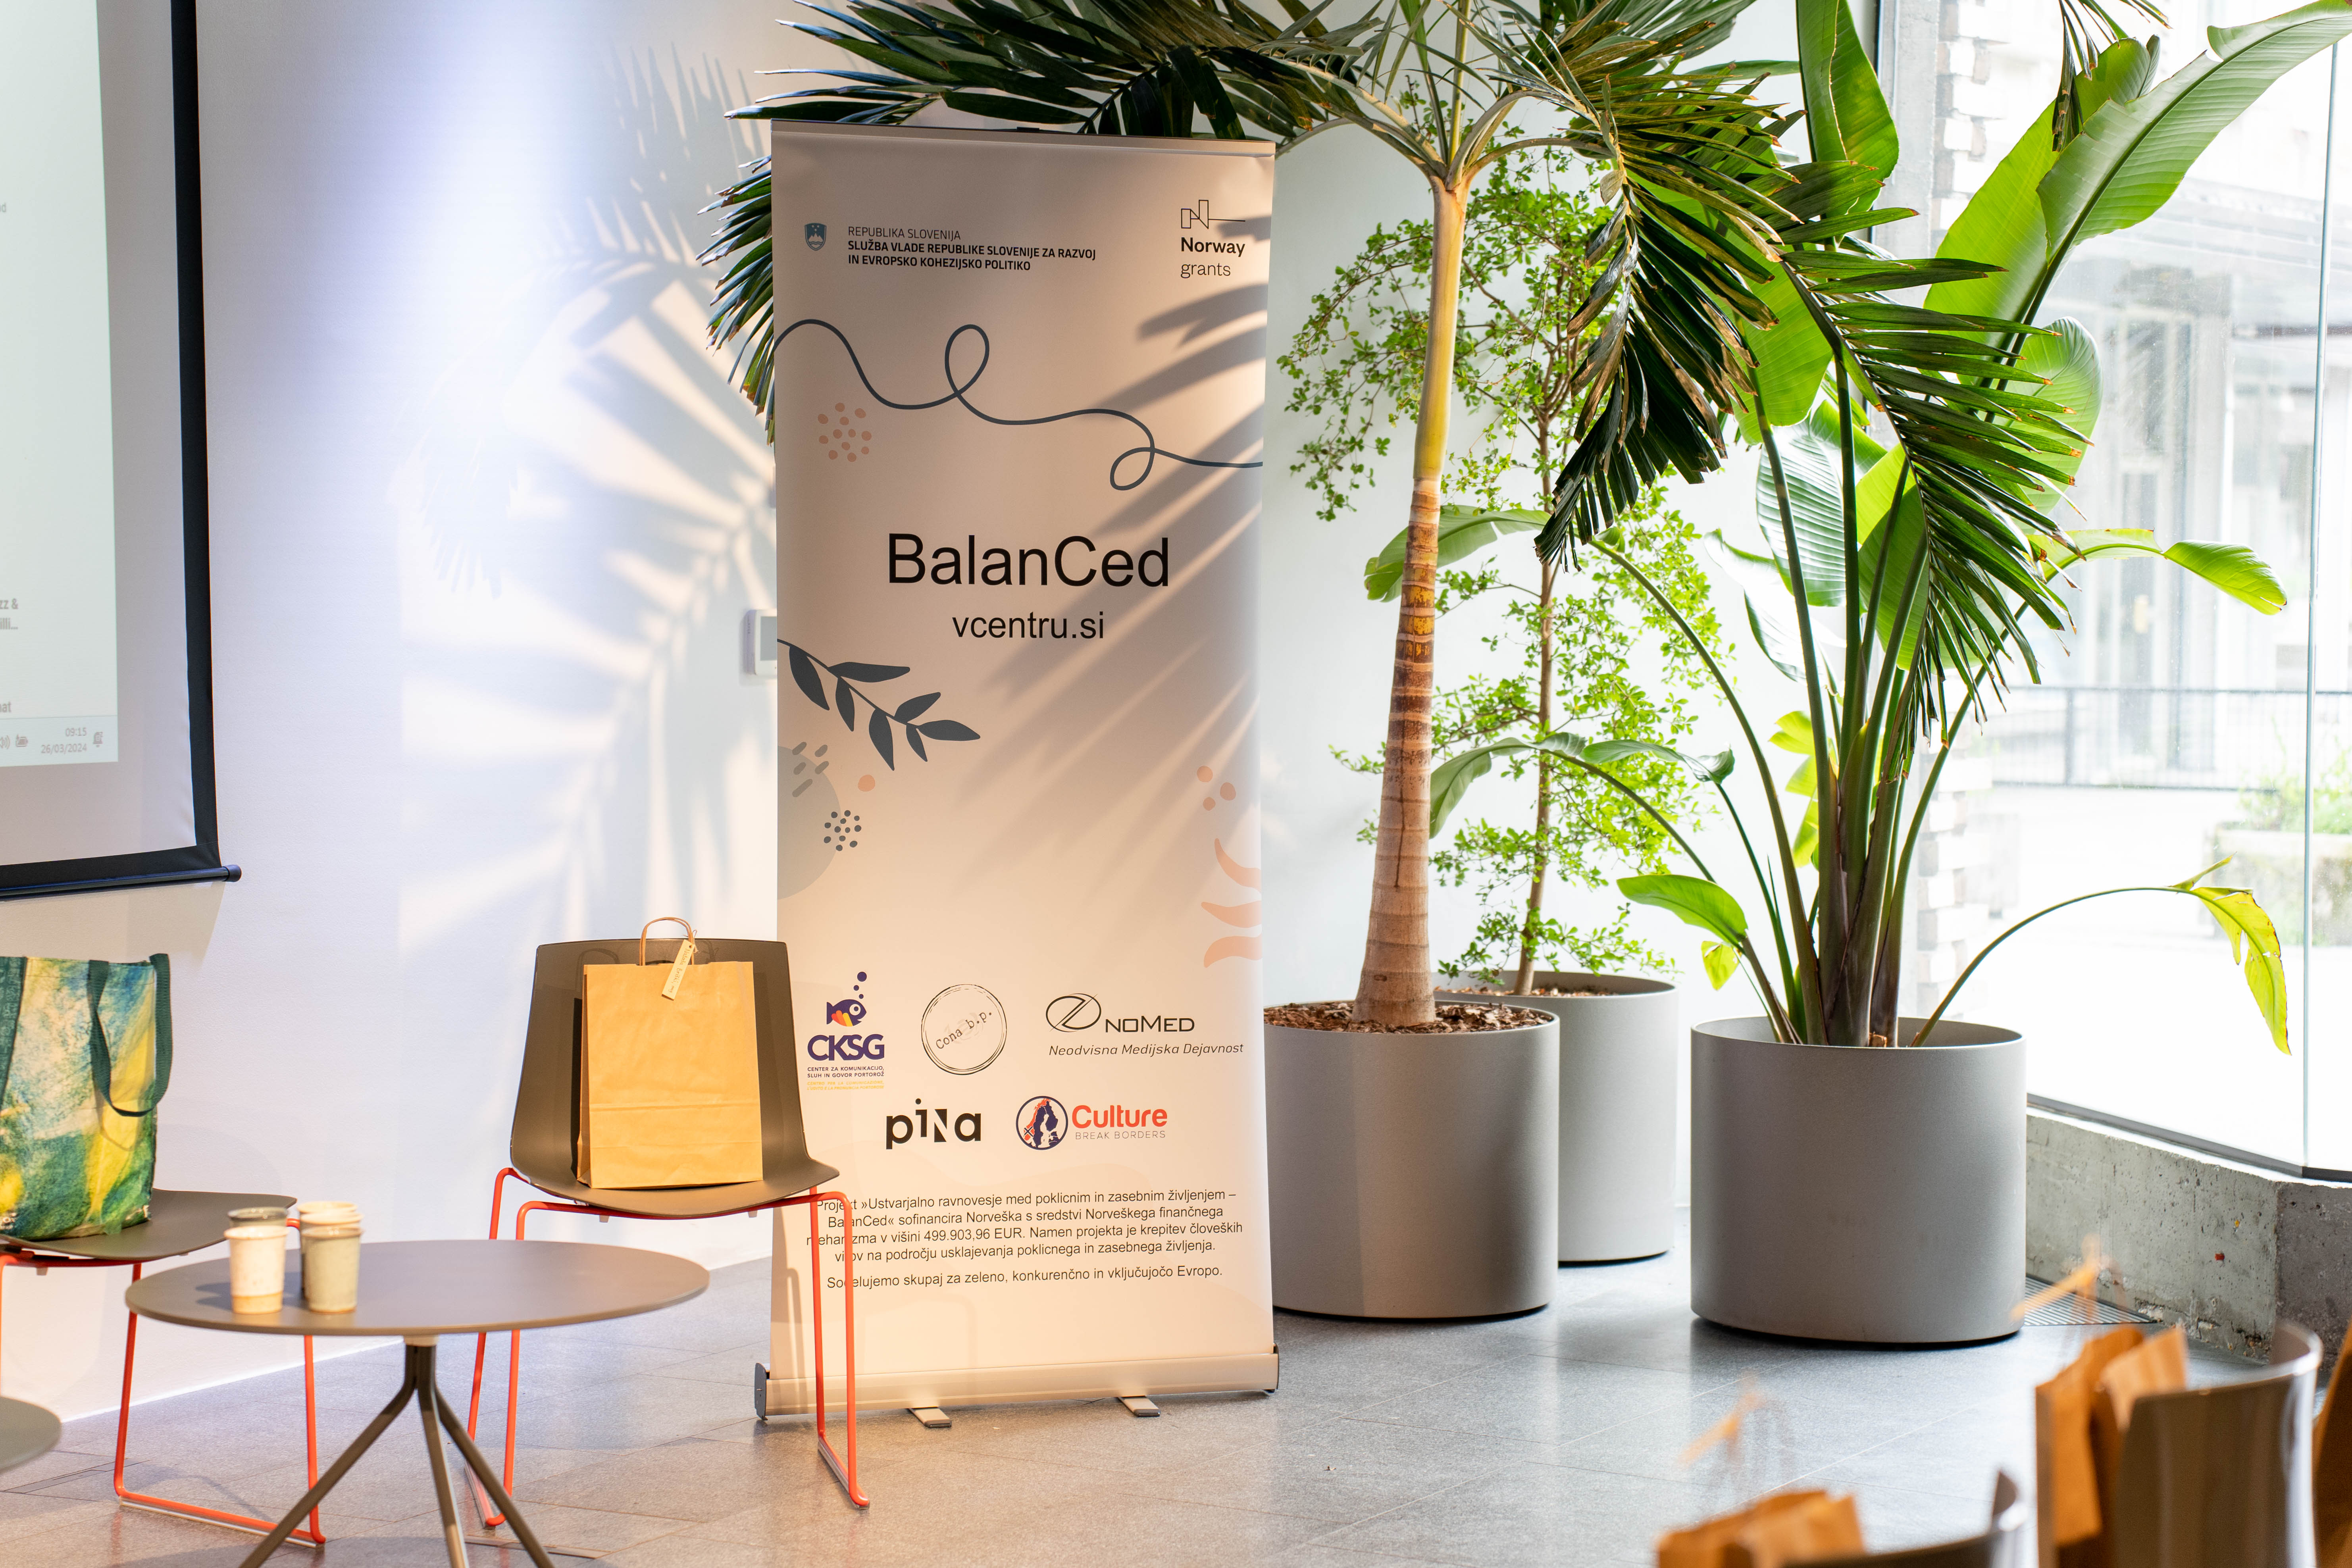 Project BalanCed final conference